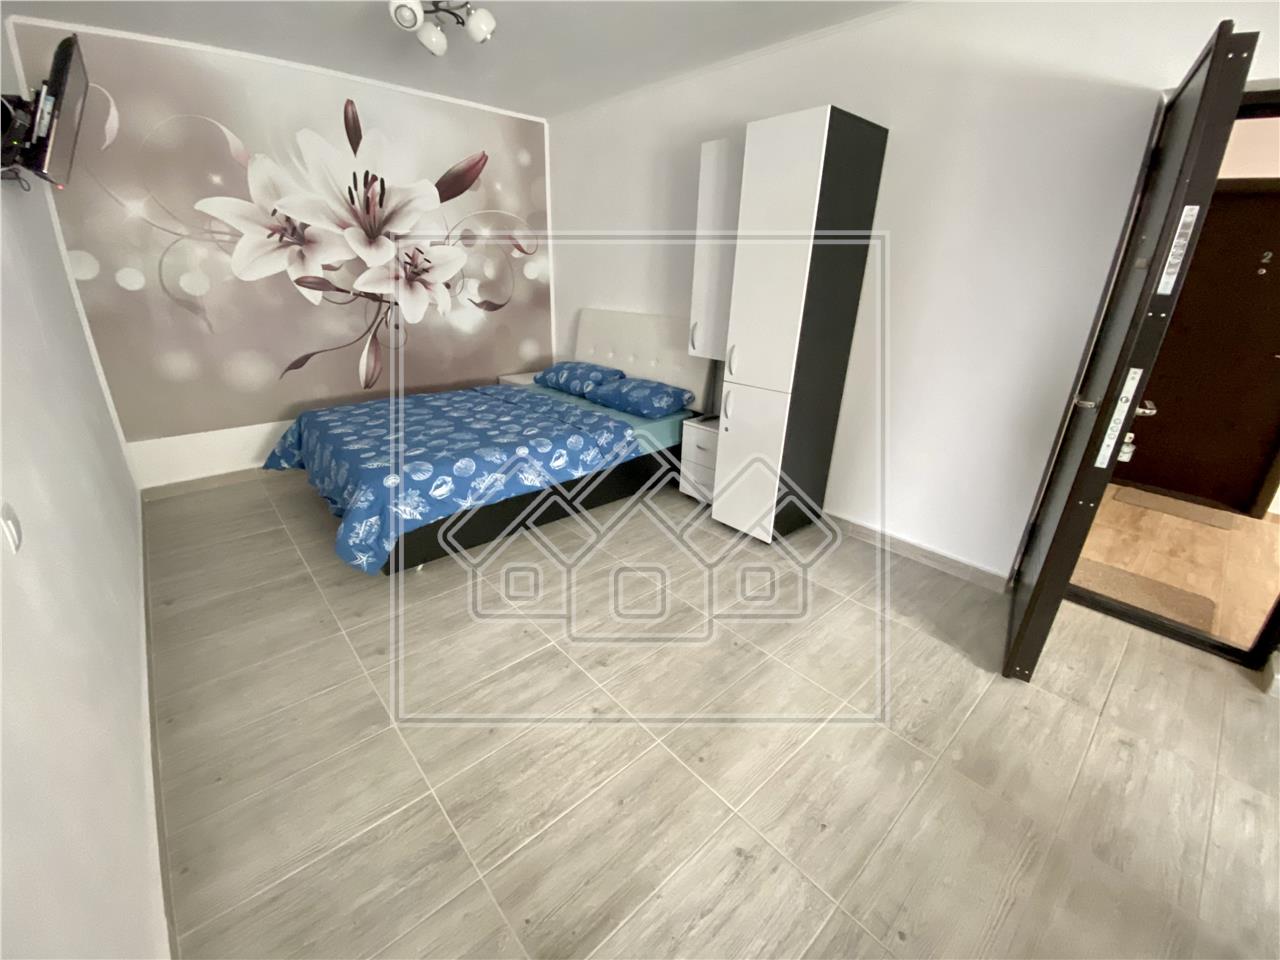 House for sale in Sibiu with 4 apartments